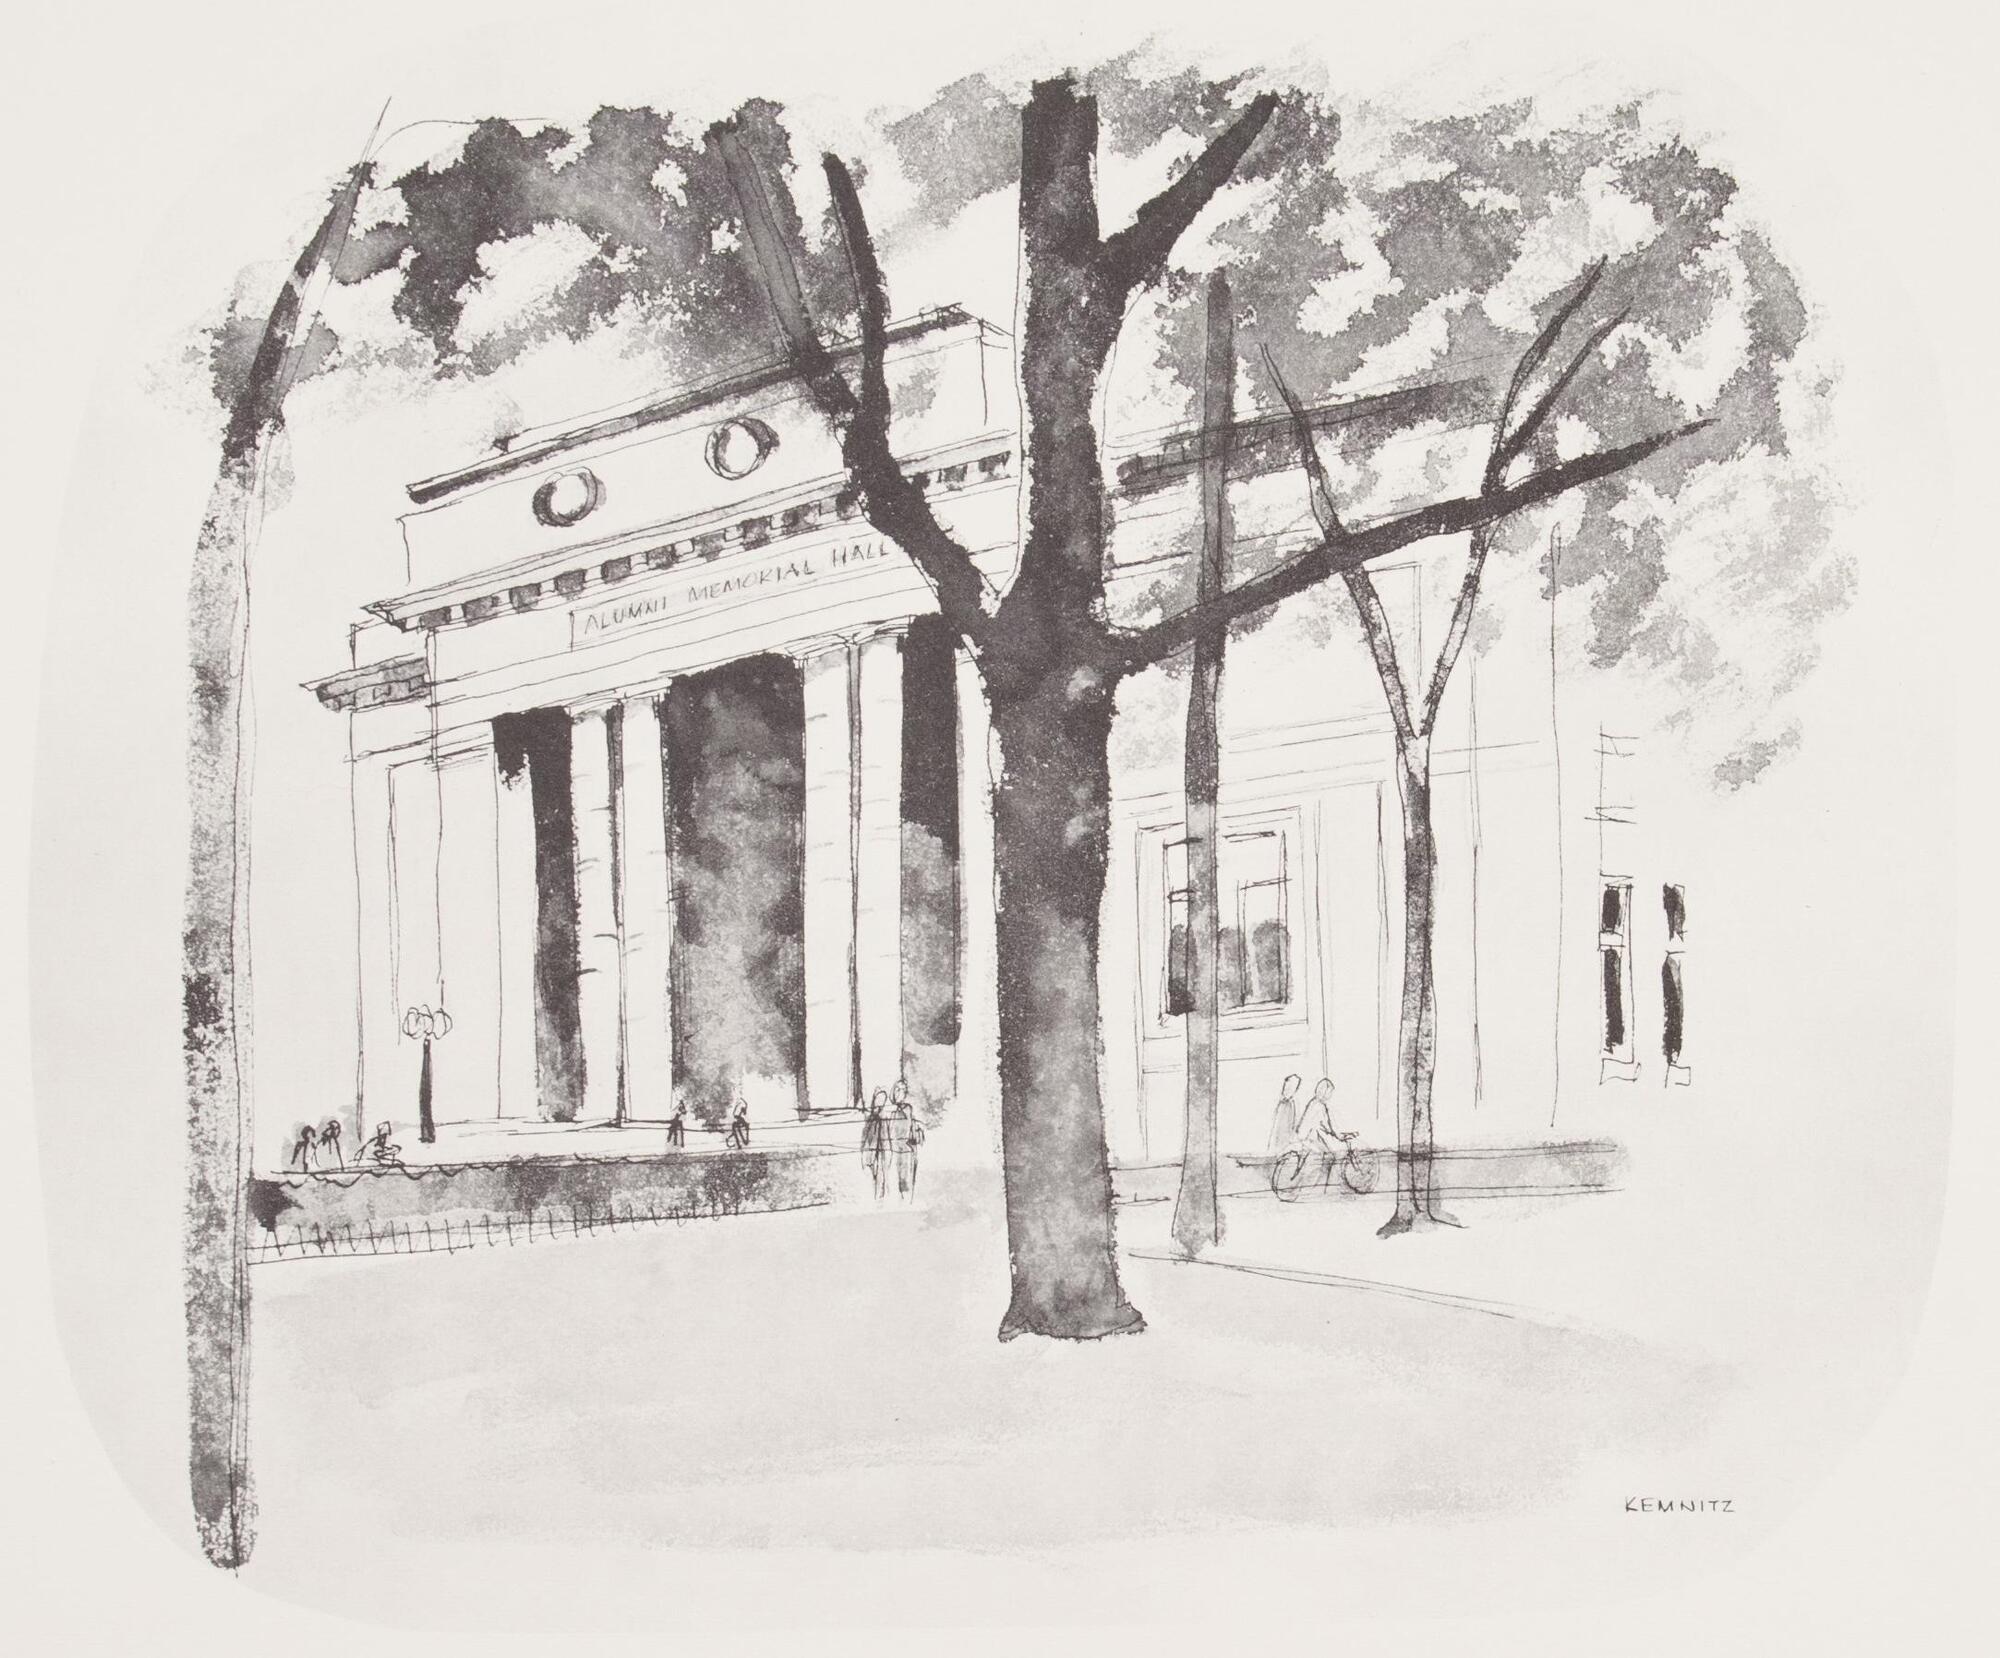 The neoclassical facade of the building that now houses the University of Michigan Museum of Art.